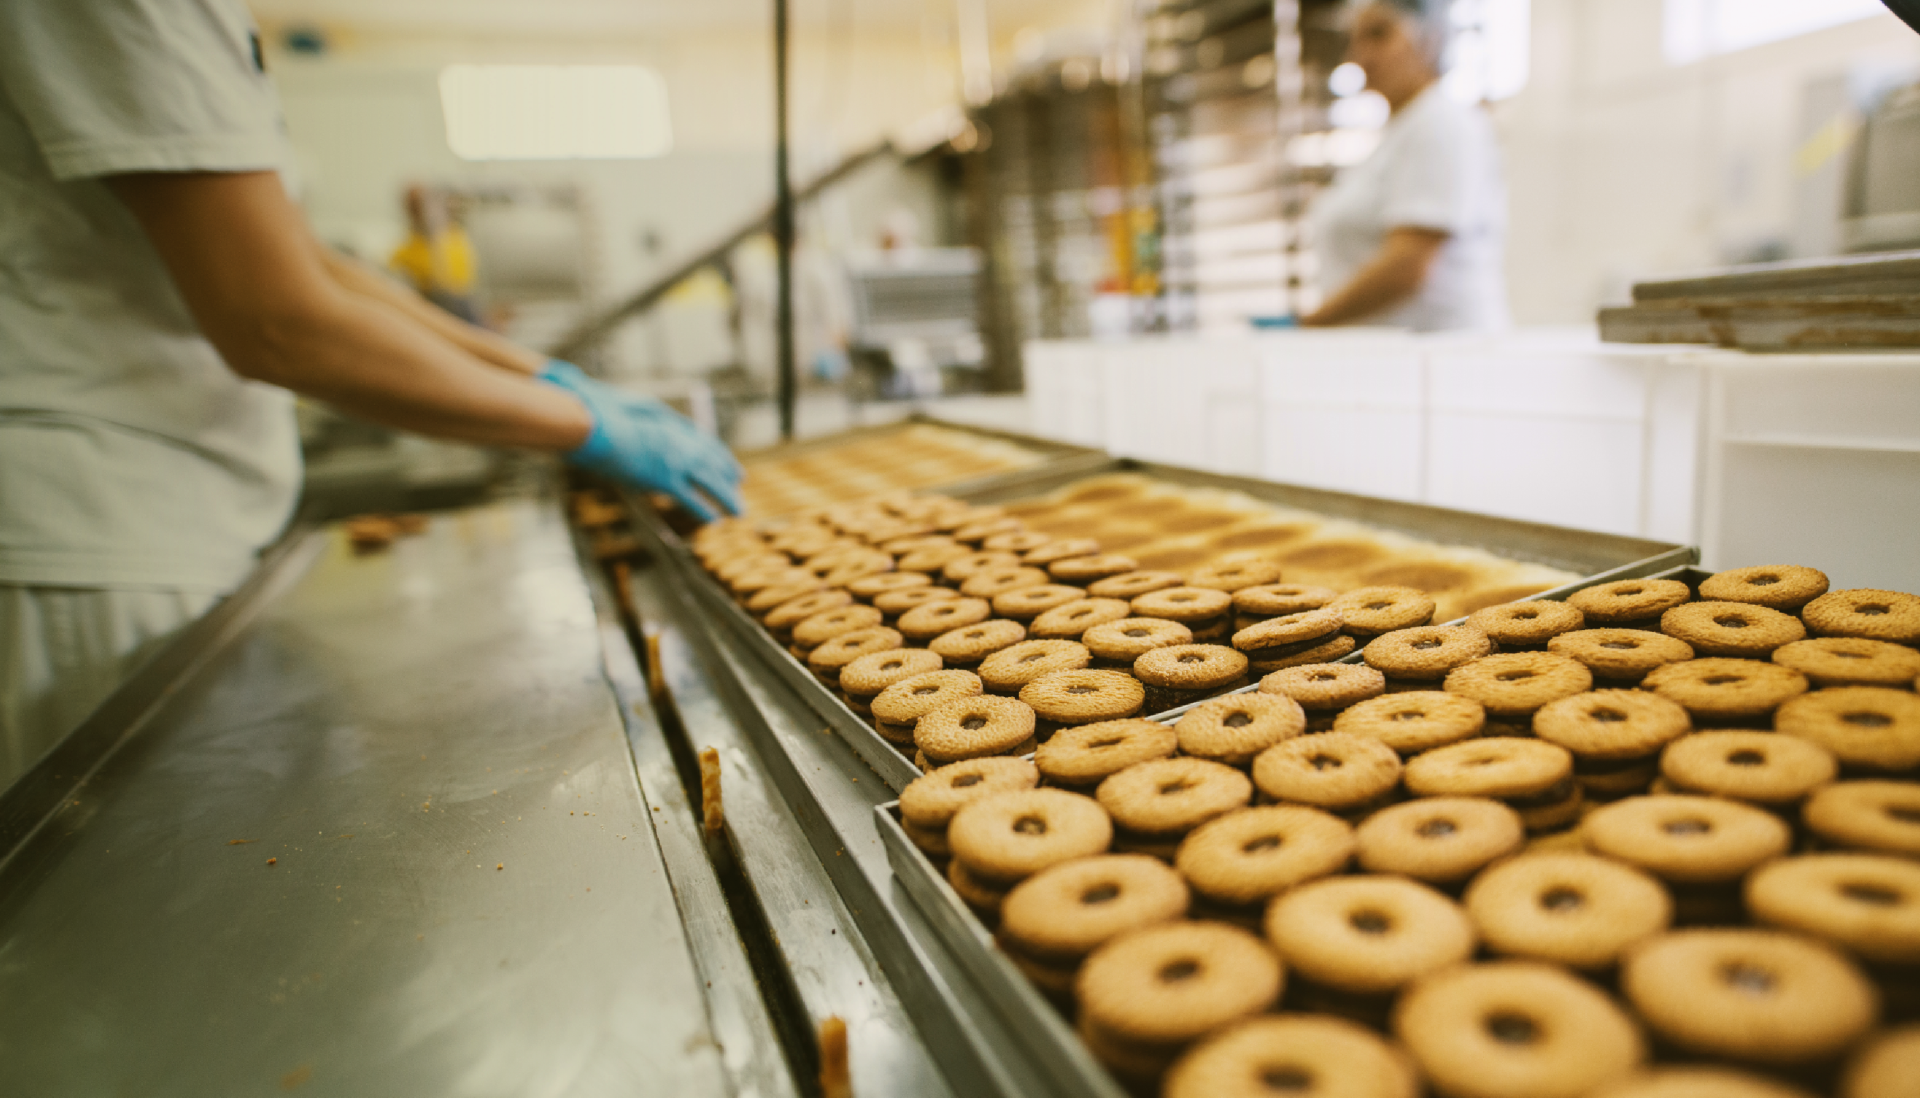 Conveyor belt in a cookie factory, showcasing agile manufacturing and Industry 4.0 principles, driving digital transformation in the manufacturing industry.